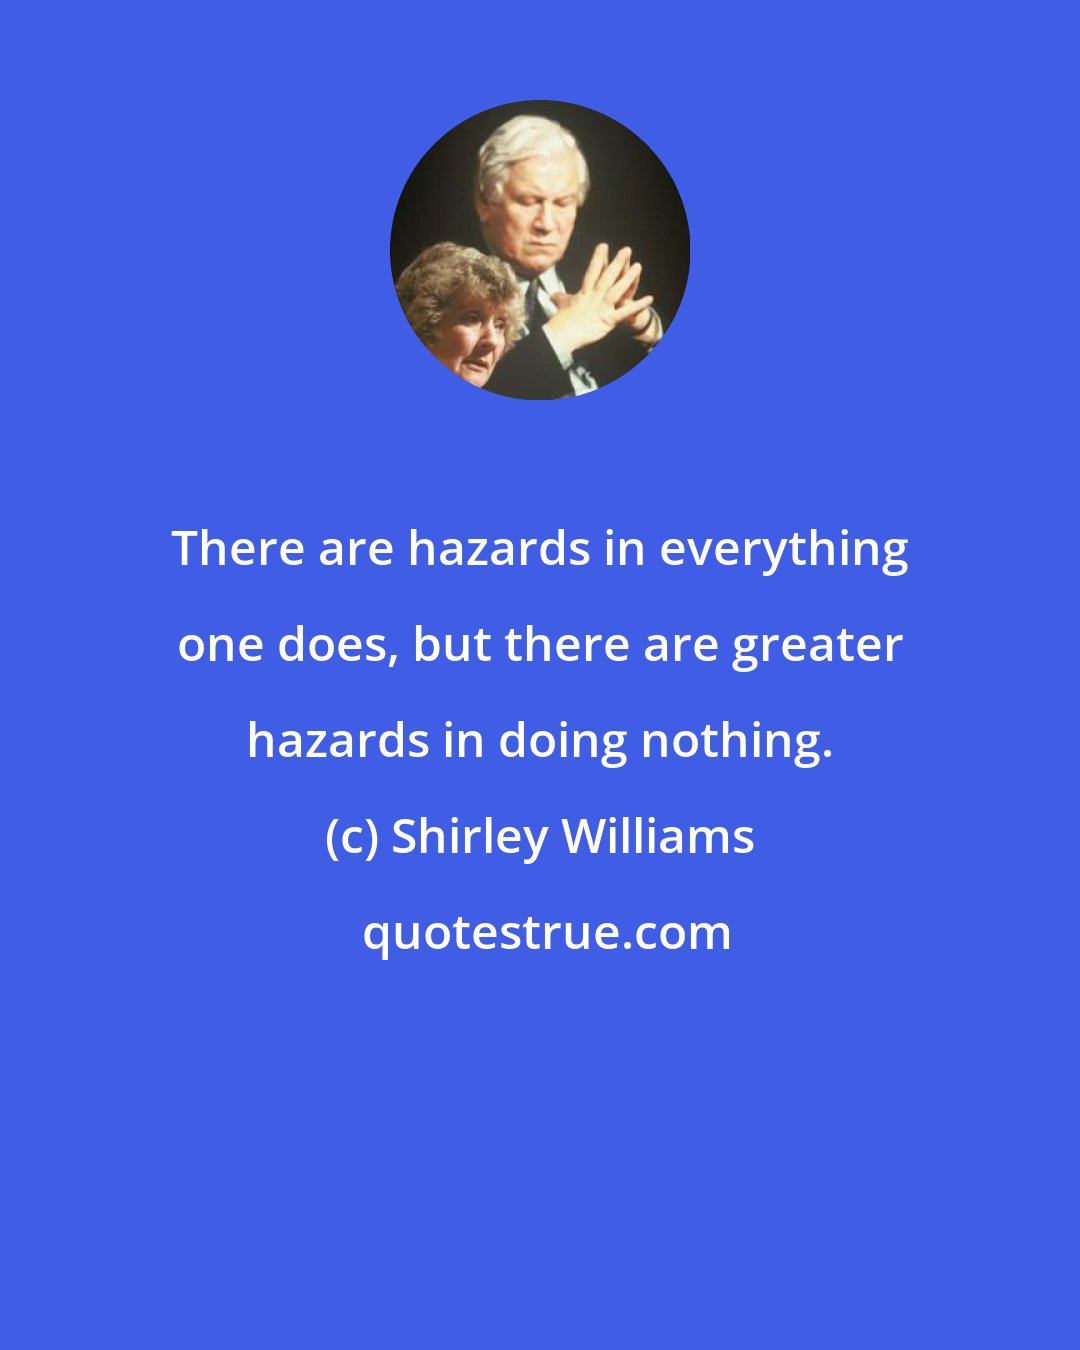 Shirley Williams: There are hazards in everything one does, but there are greater hazards in doing nothing.